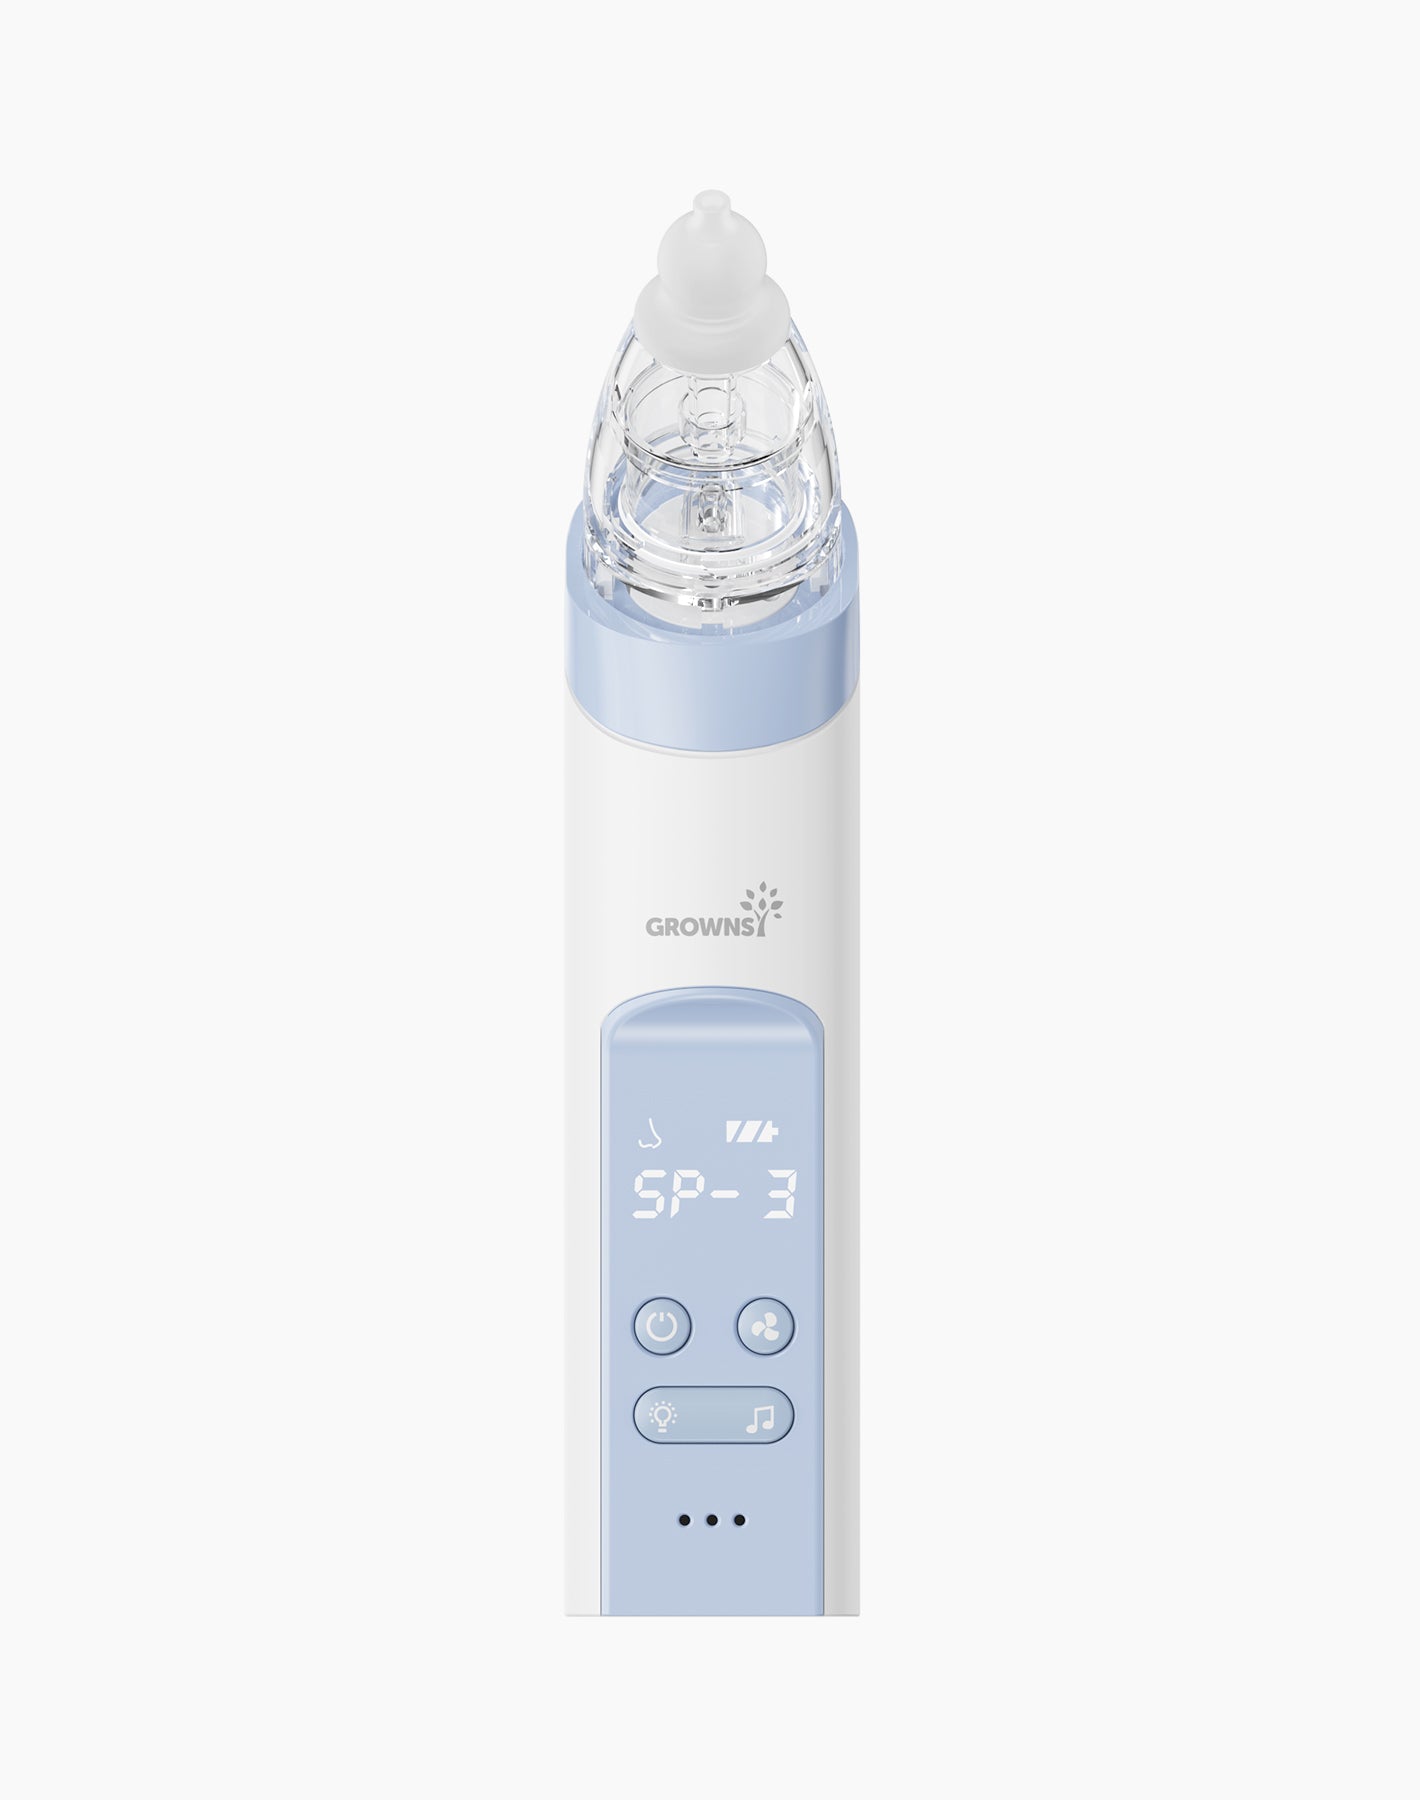 Electric Nose Suction for Baby,Rechargeable Nasal Aspirator for Baby with  Music & Light,Nose Sucker Snot Sucker for Baby and Toddler,Booger Remover  with 3 Suction for Newborn Infant 